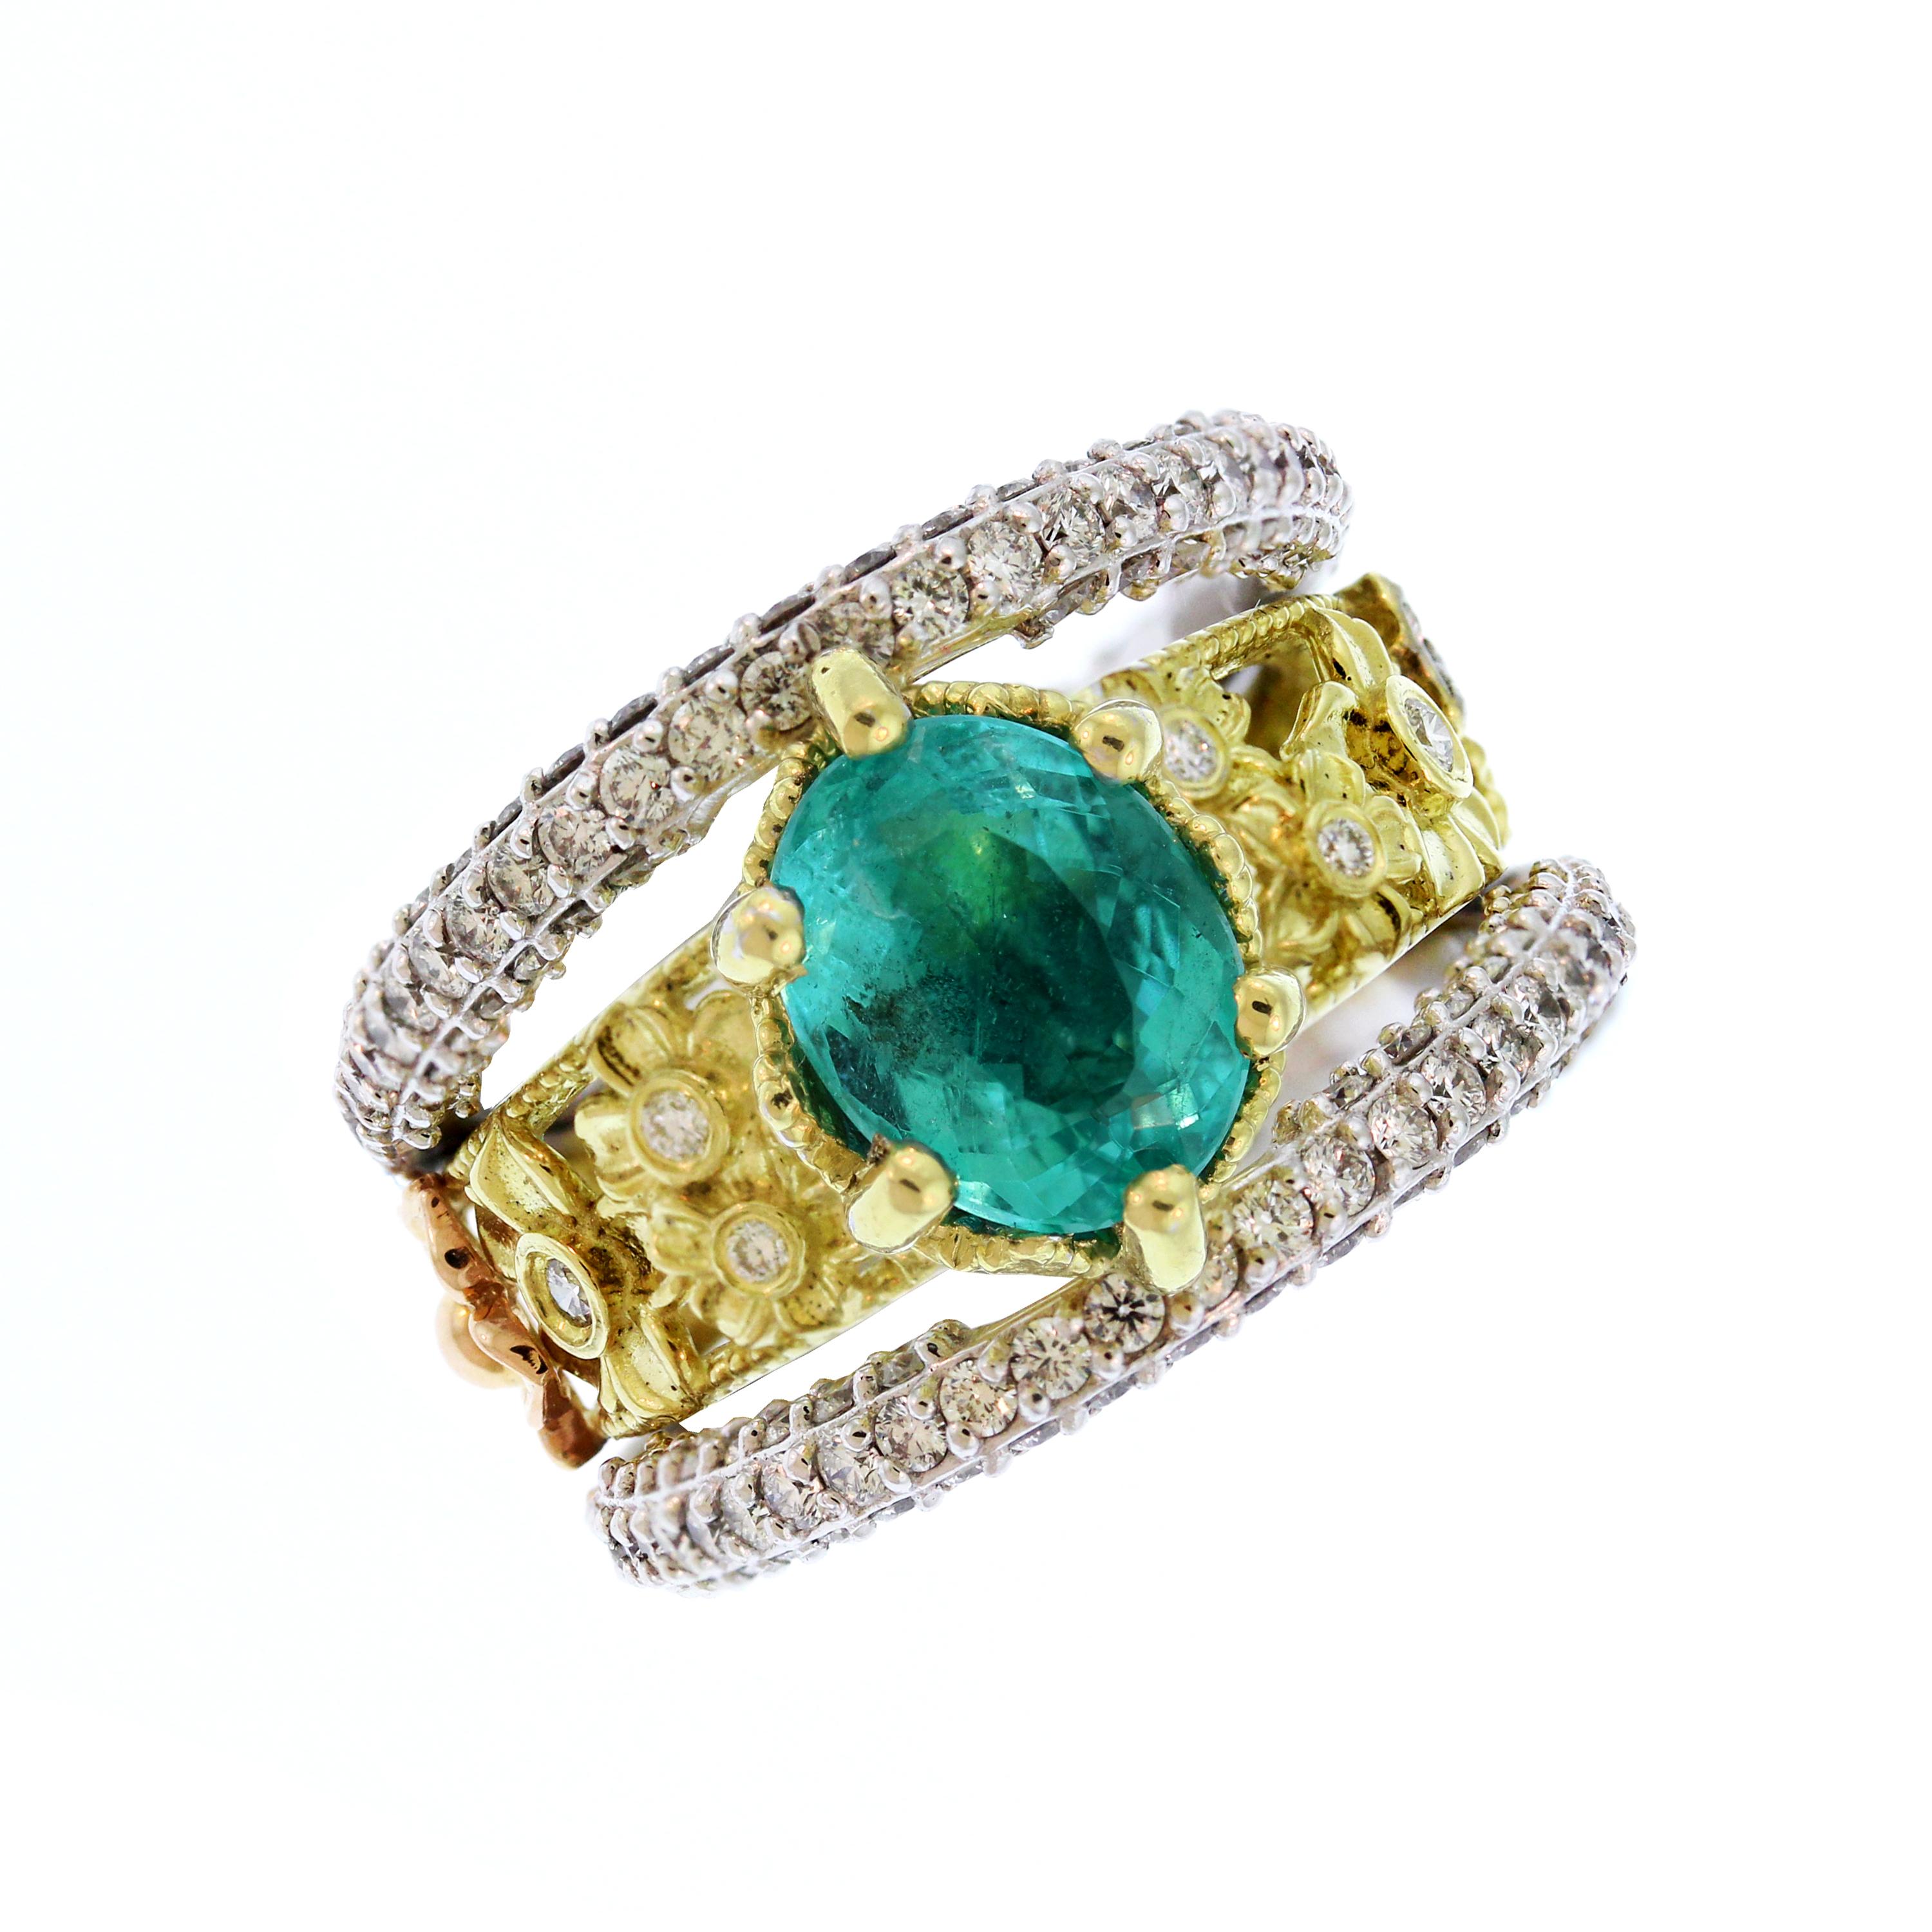 Stambolian 18K Tri-Color Gold Paraiba Copper Bearing Tourmaline Diamond Ring

This is a one of a kind ring with a stunning display of design work and craftsmanship. The ring itself has three sections. One done in yellow gold with flowers and two all